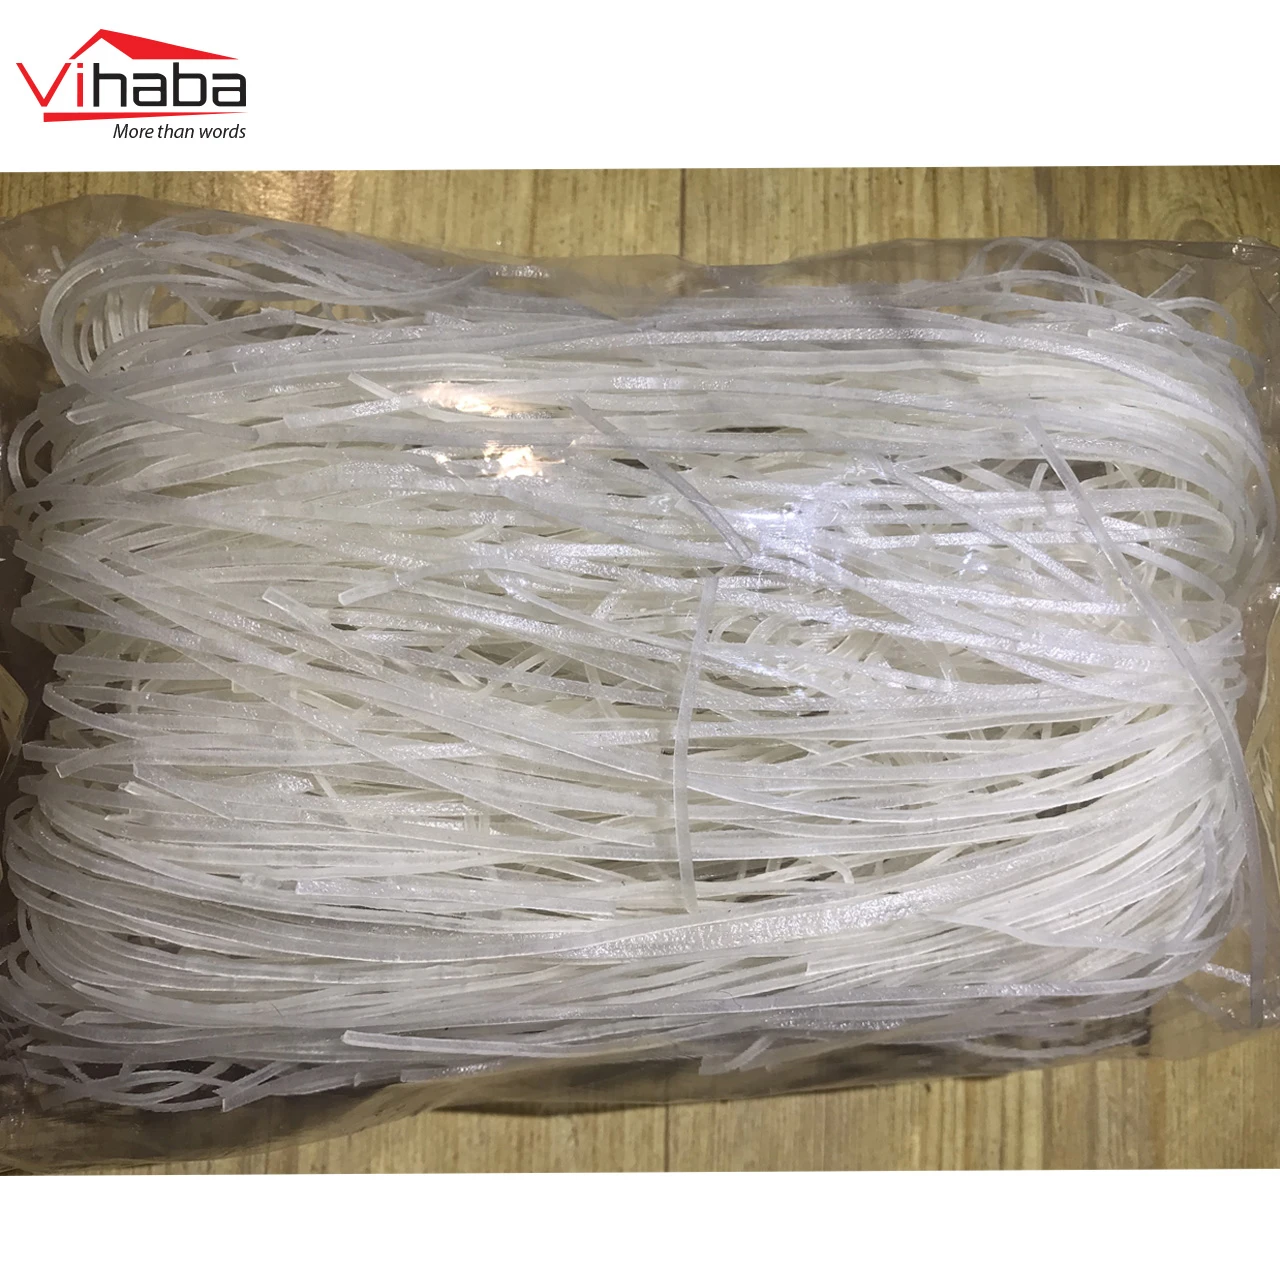 Products in Bulk Dehydrated Low Calories Quick Cooking Vegetarian Food White Rice Noodle Stick